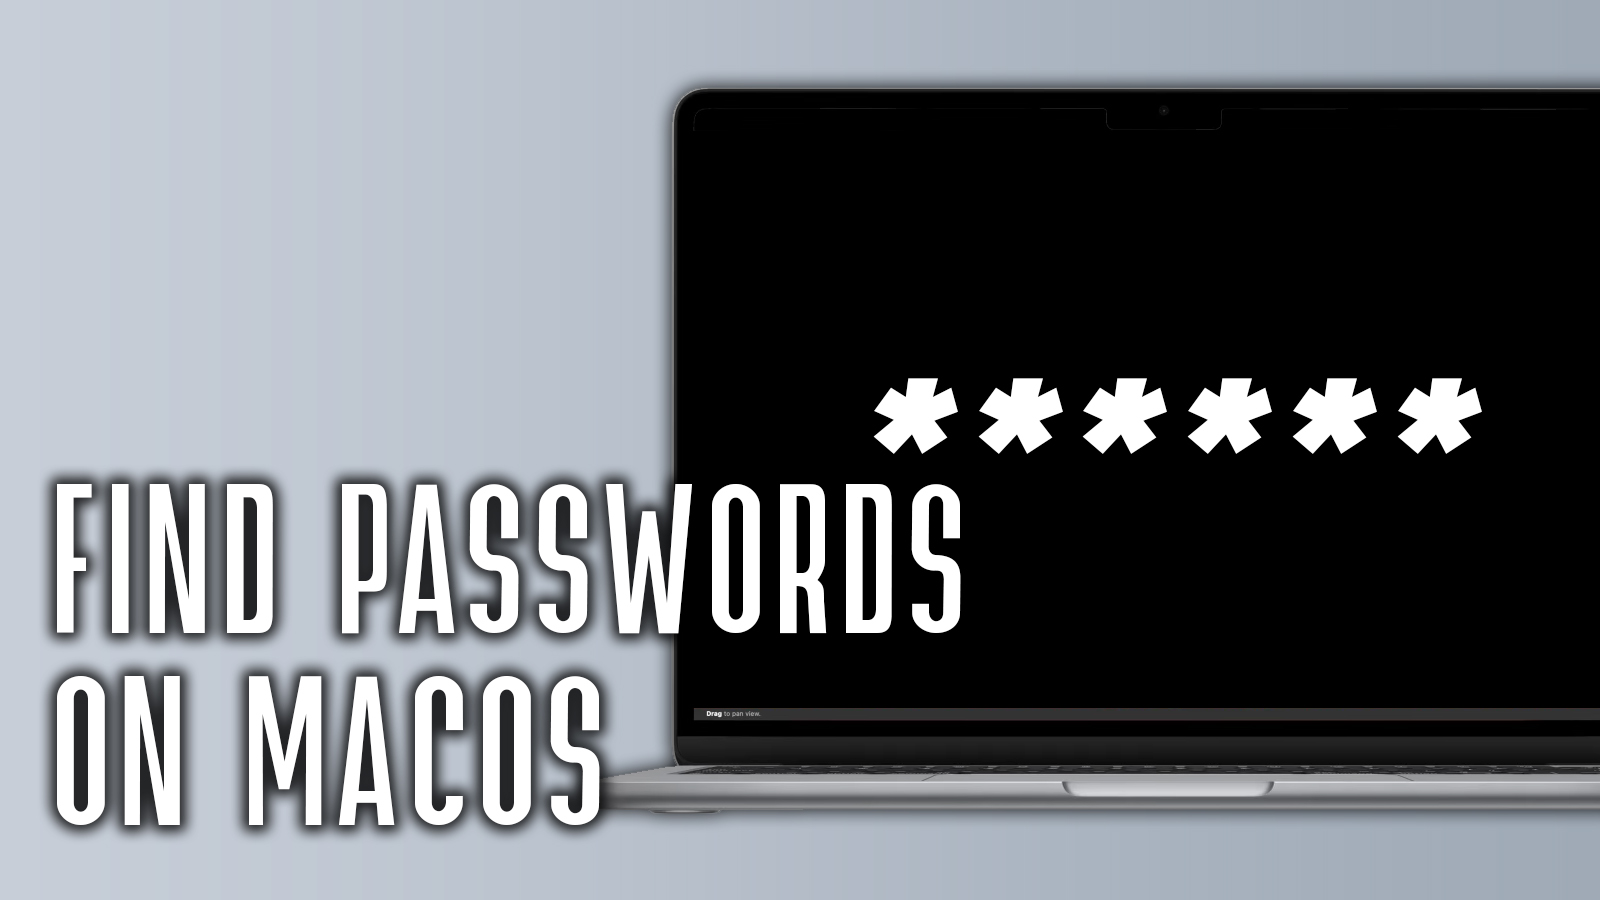 Easy methods to discover saved passwords on Mac (2022) – Egaxo